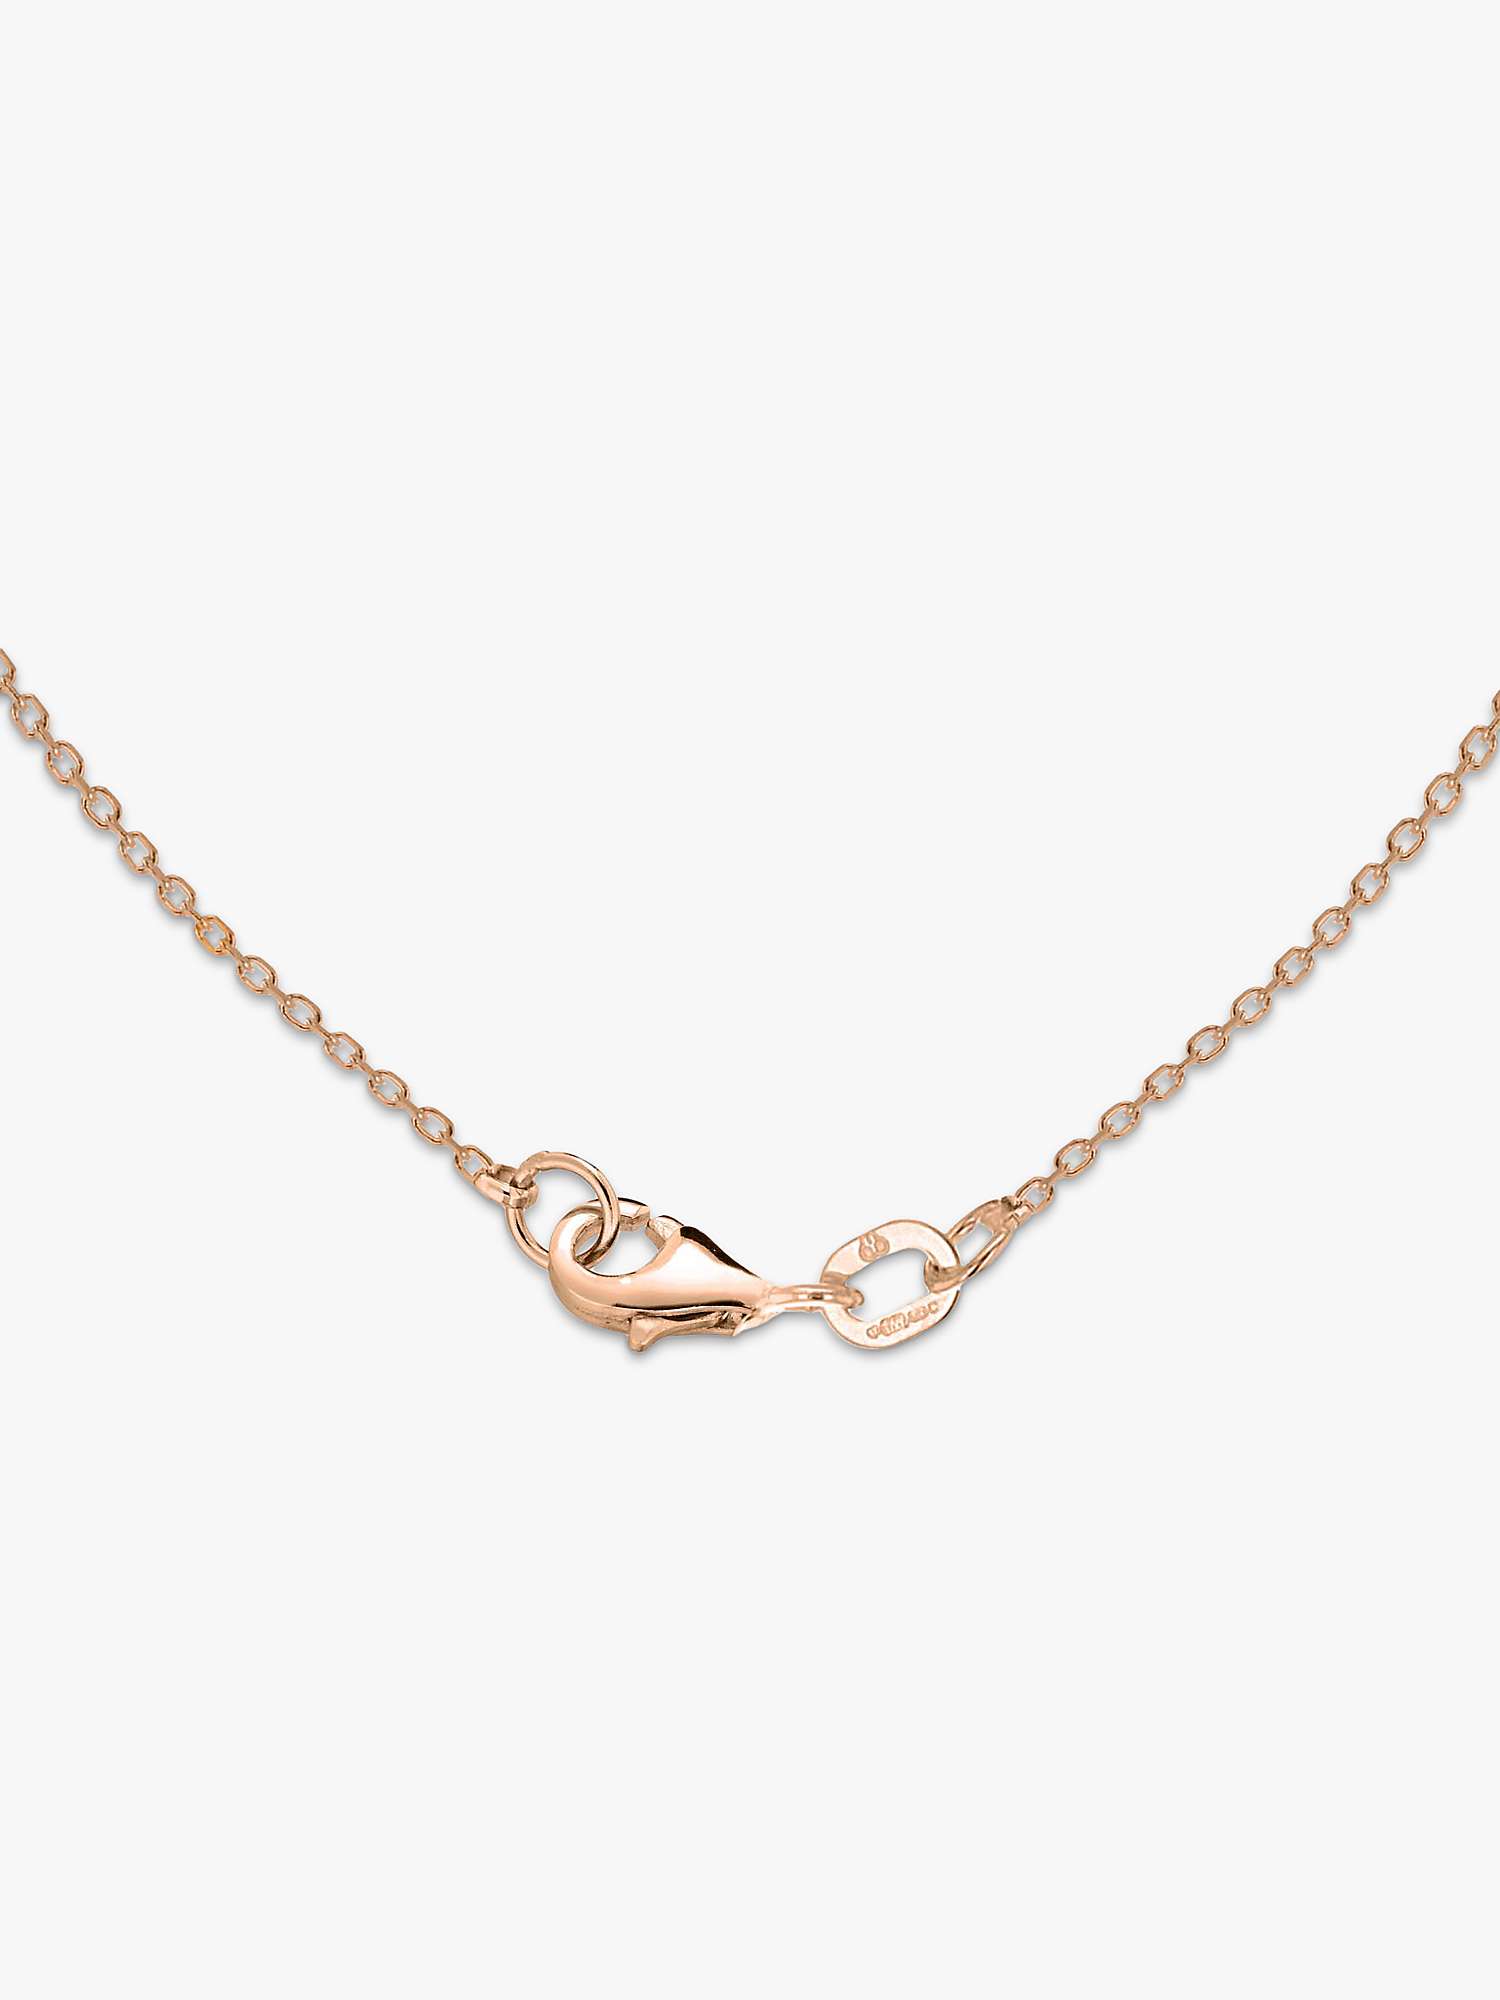 Buy IBB Personalised Small Horizontal Bar Initial Pendant Necklace, Rose Gold Online at johnlewis.com